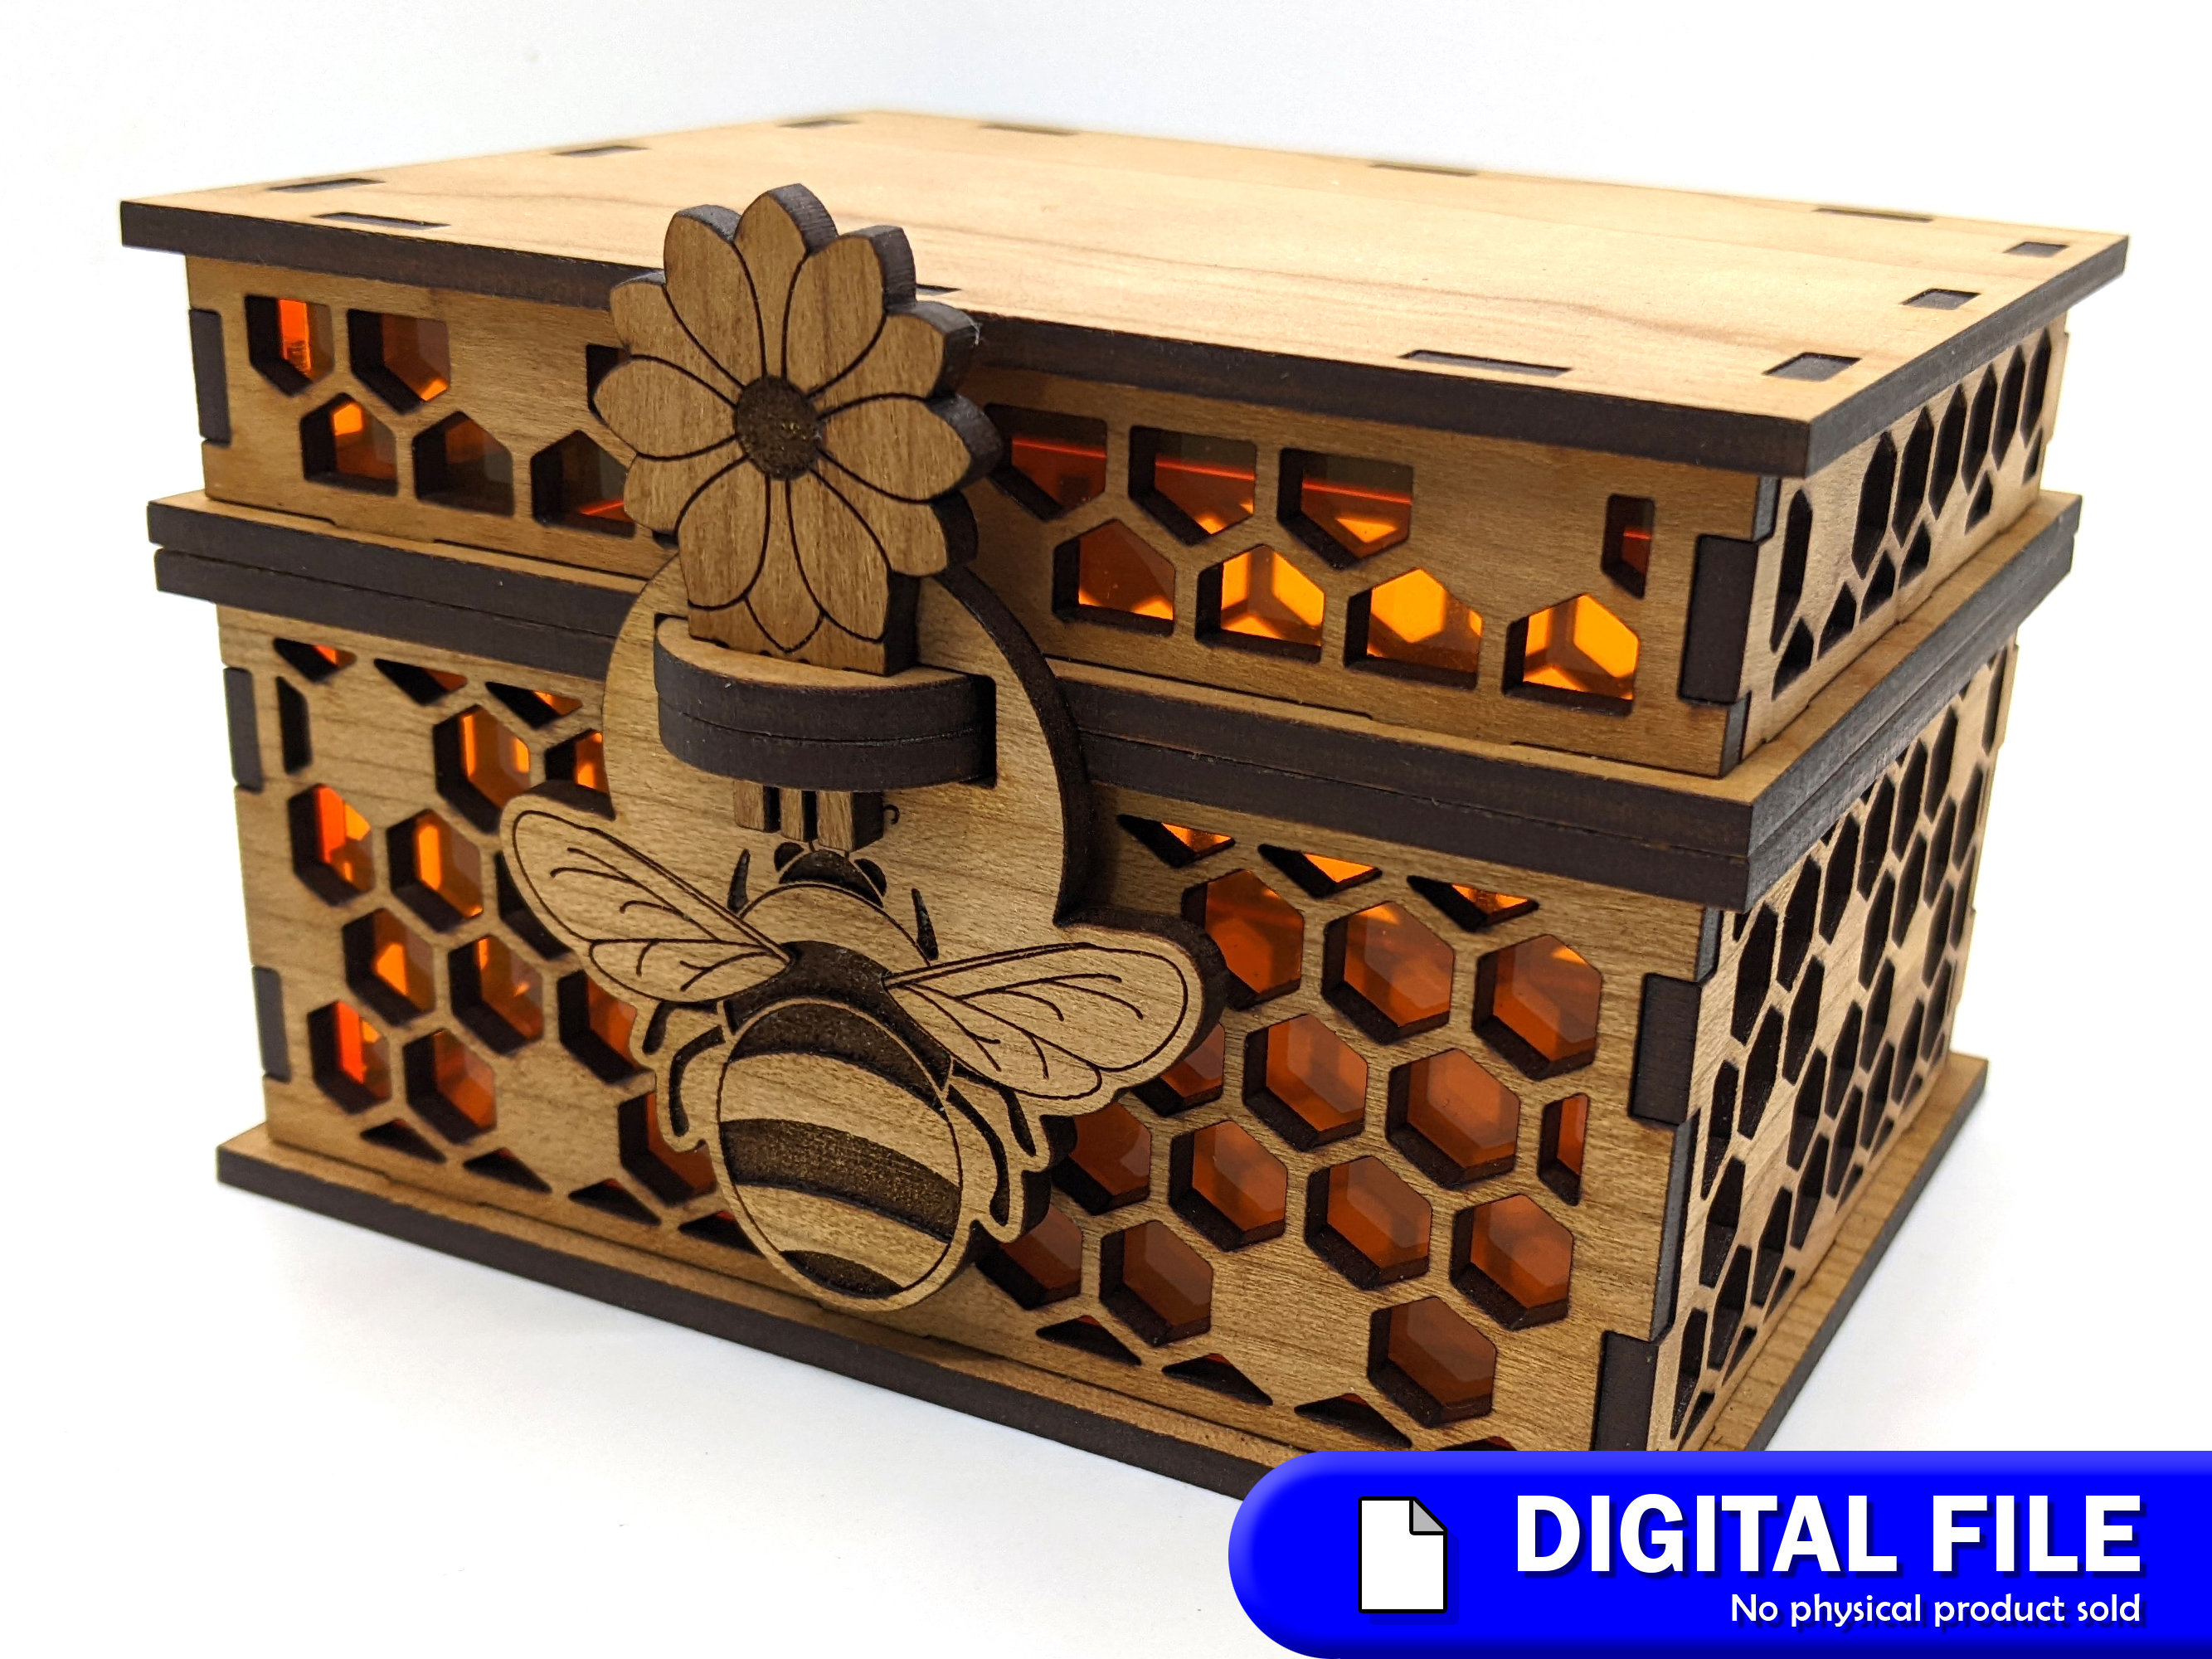 Bee Hive Favour Box SVG + PDF Templates Graphic by Esselle Crafts